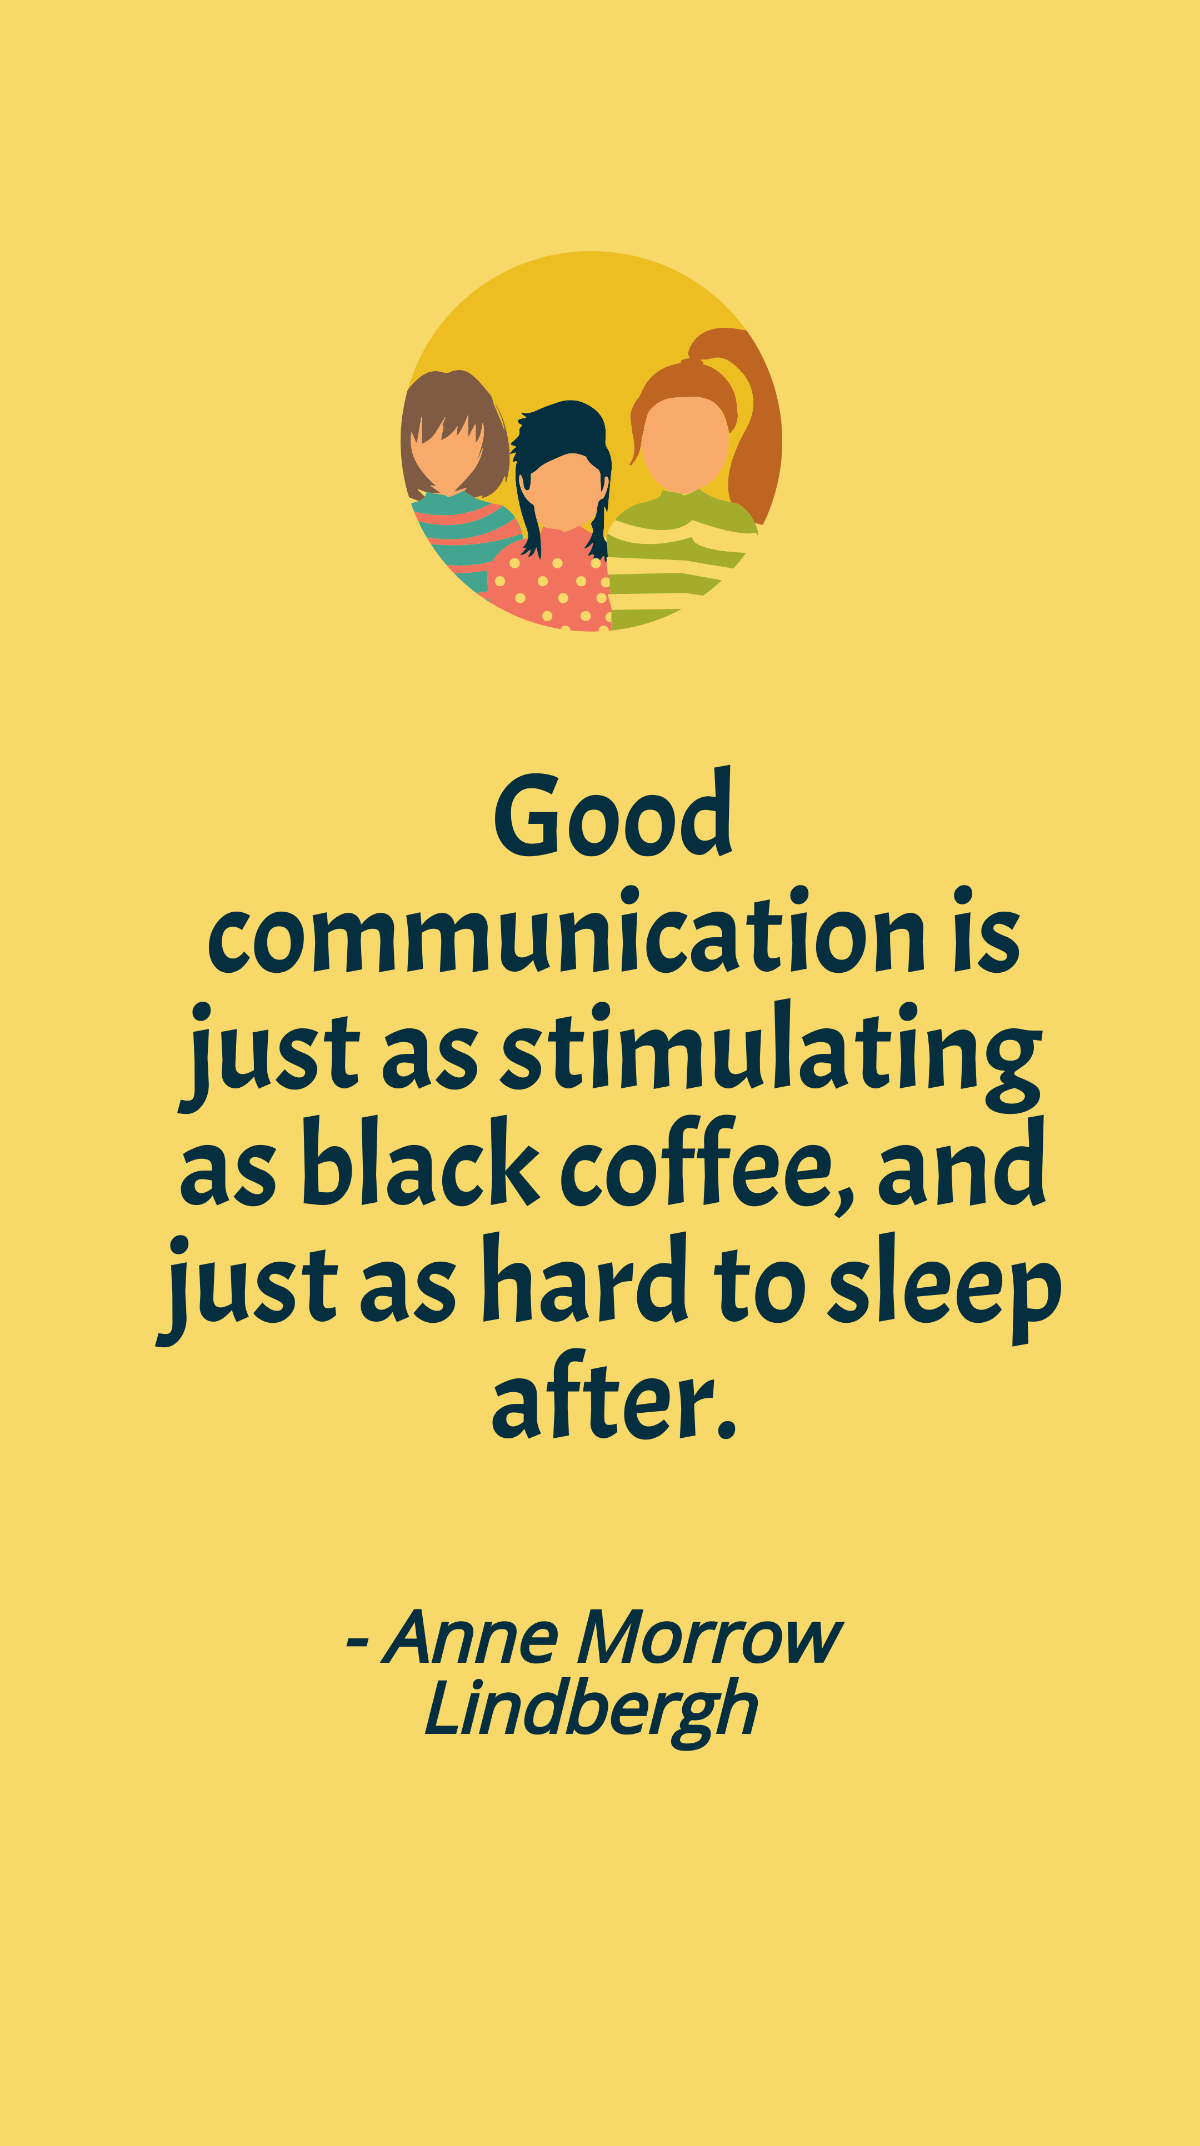 Anne Morrow Lindbergh - Good communication is just as stimulating as black coffee, and just as hard to sleep after. Template